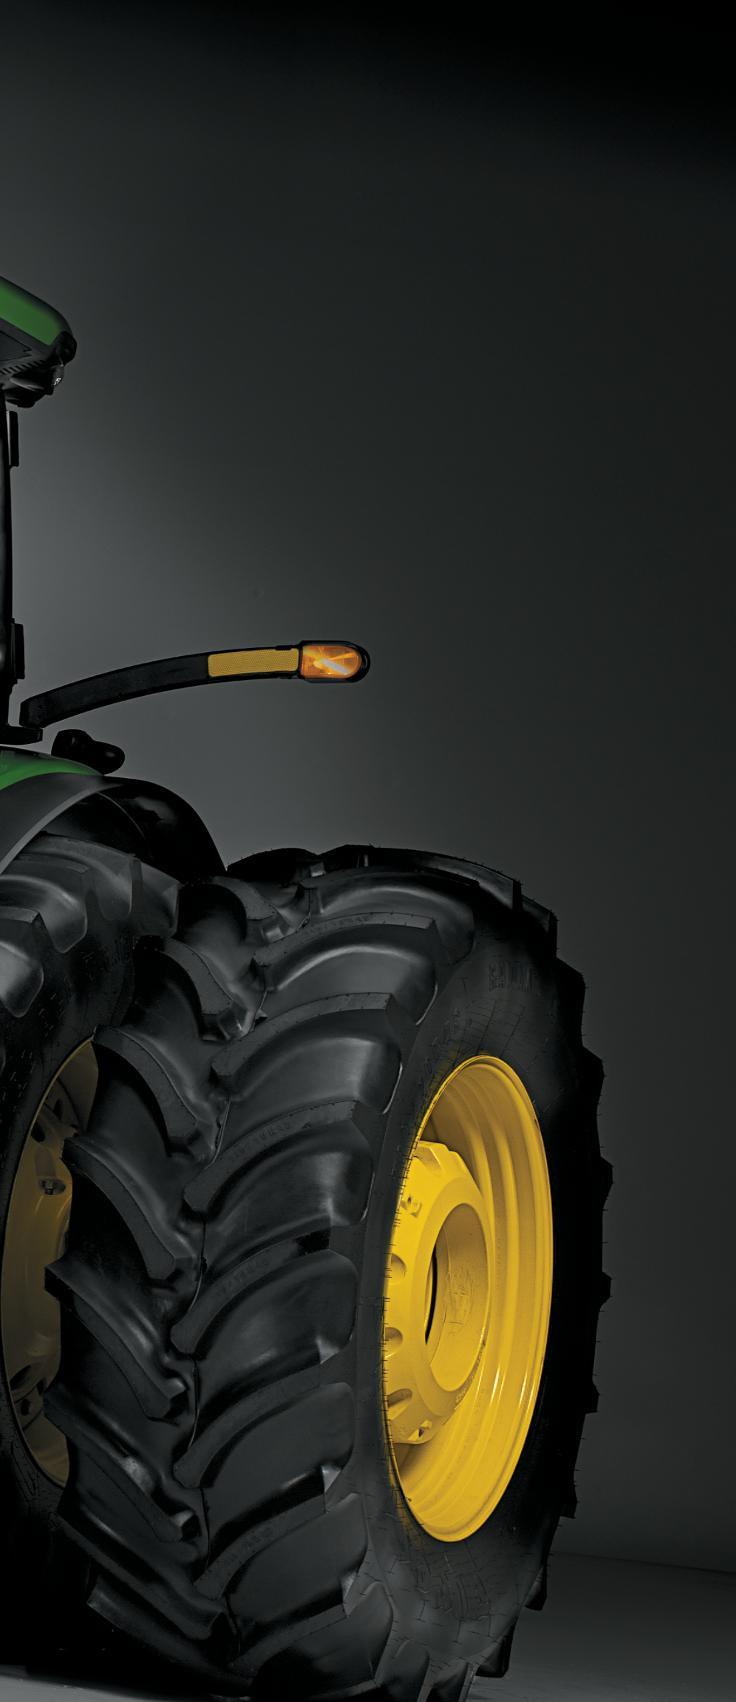 8R Series Tractors Meet the most intelligent tractors in the world With intuitive controls, integrated GreenStar and JDLink technology, the exclusive ActiveCommand Steering (ACS ) system, the best